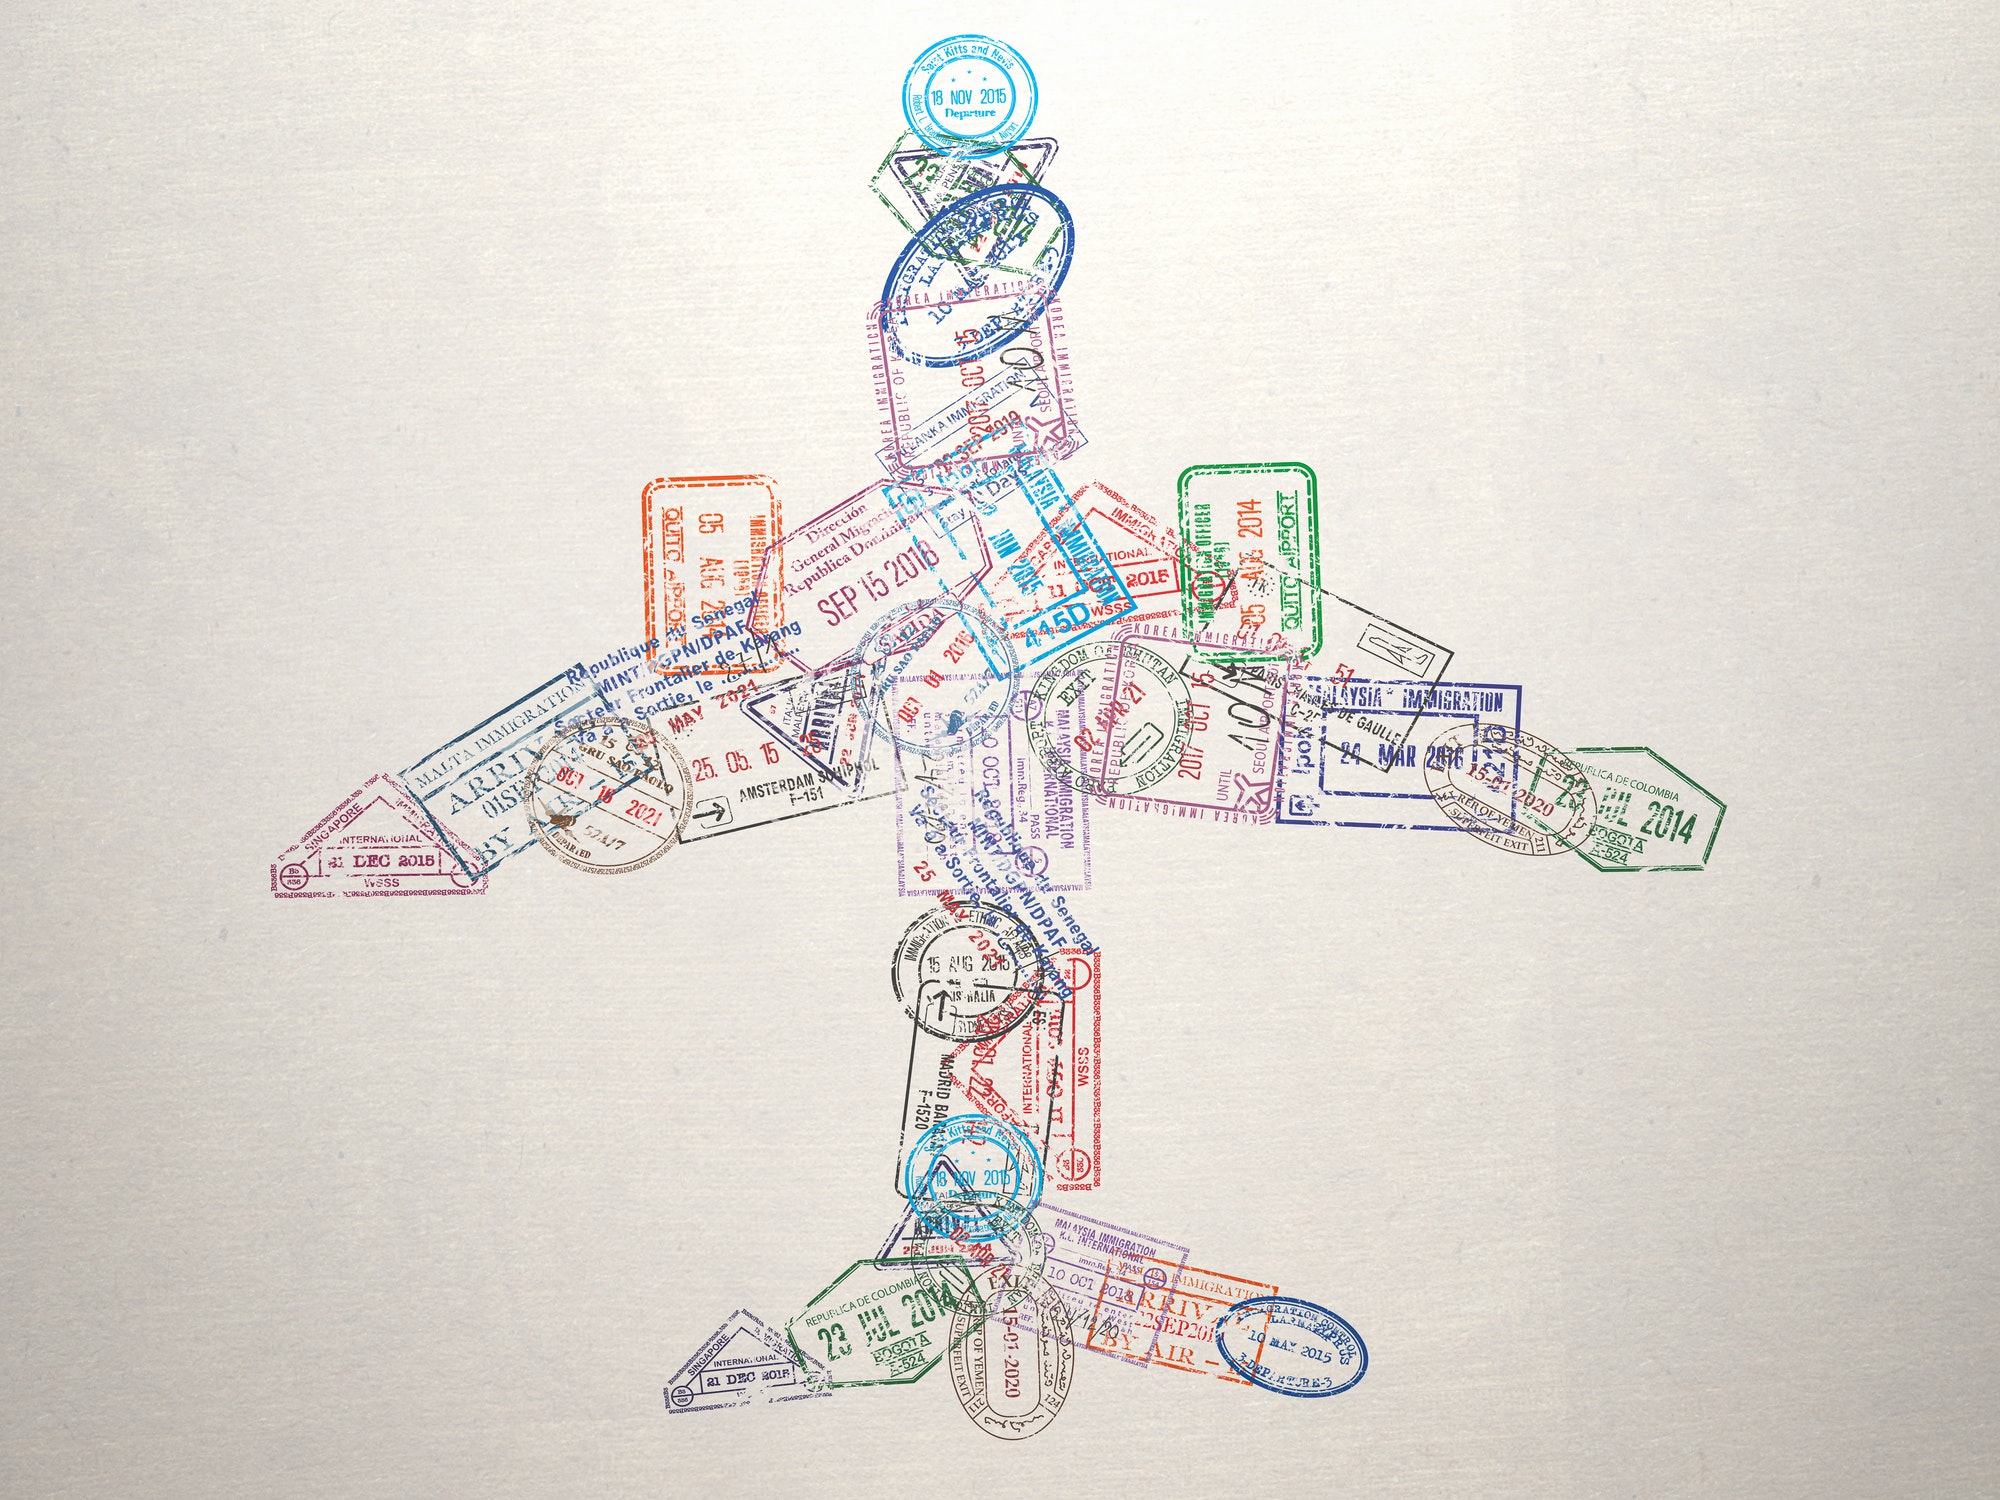 Passport stamps of different visa country in form of a airplane. Travel, tourism and immigration